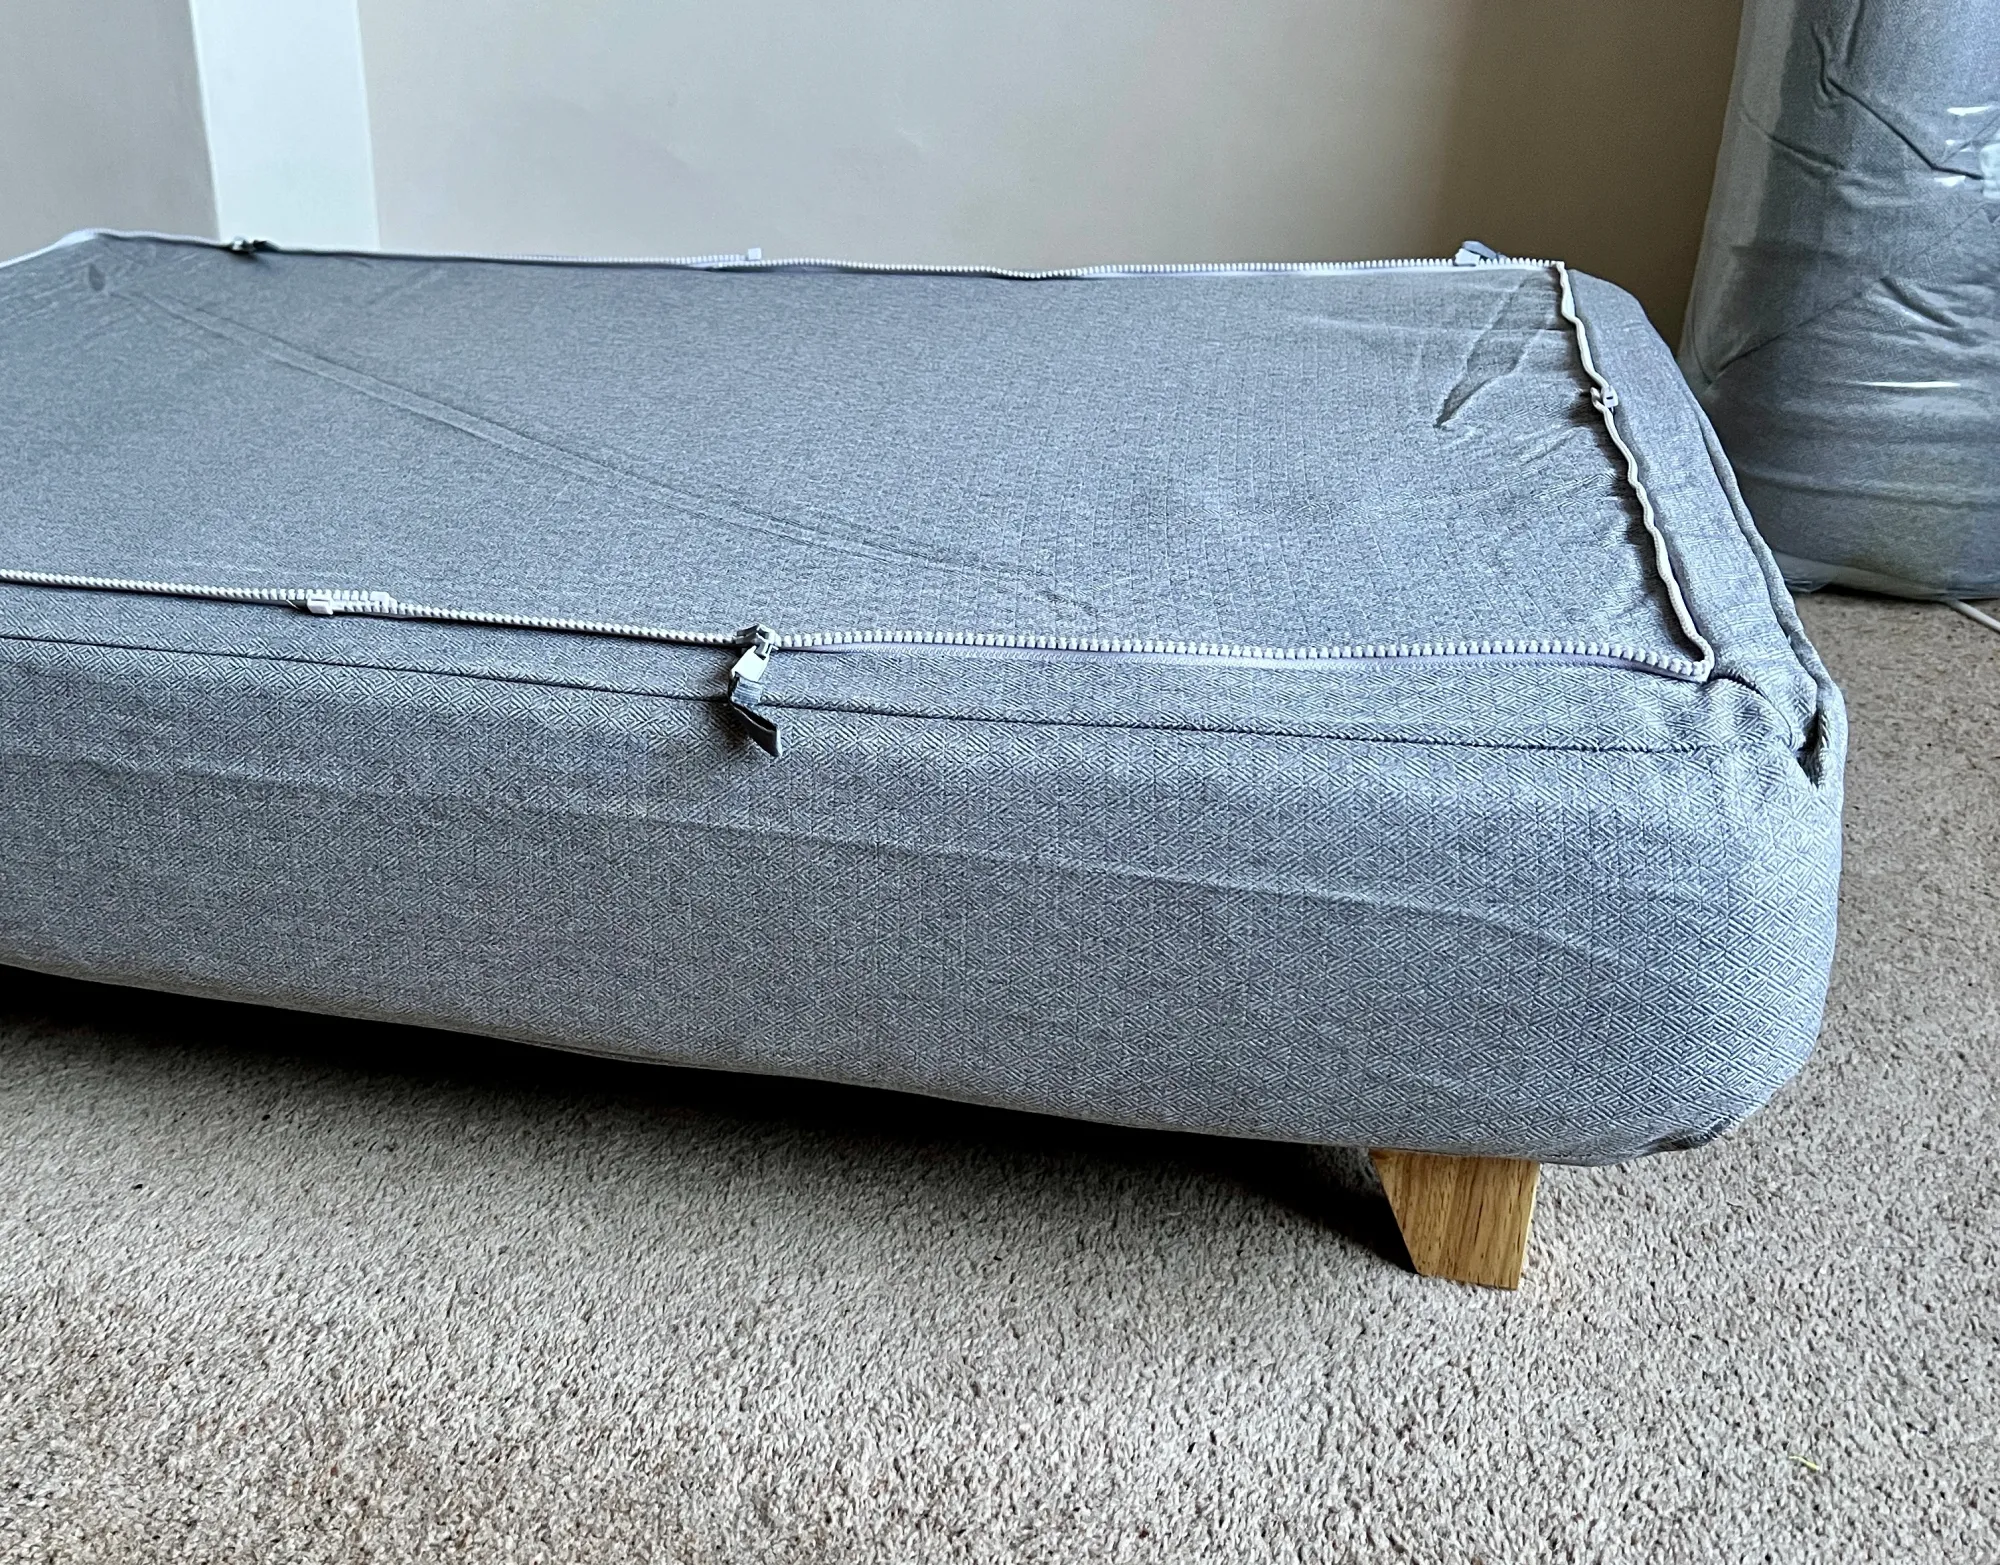 Omlet Topology Luxury Dog Bed Review